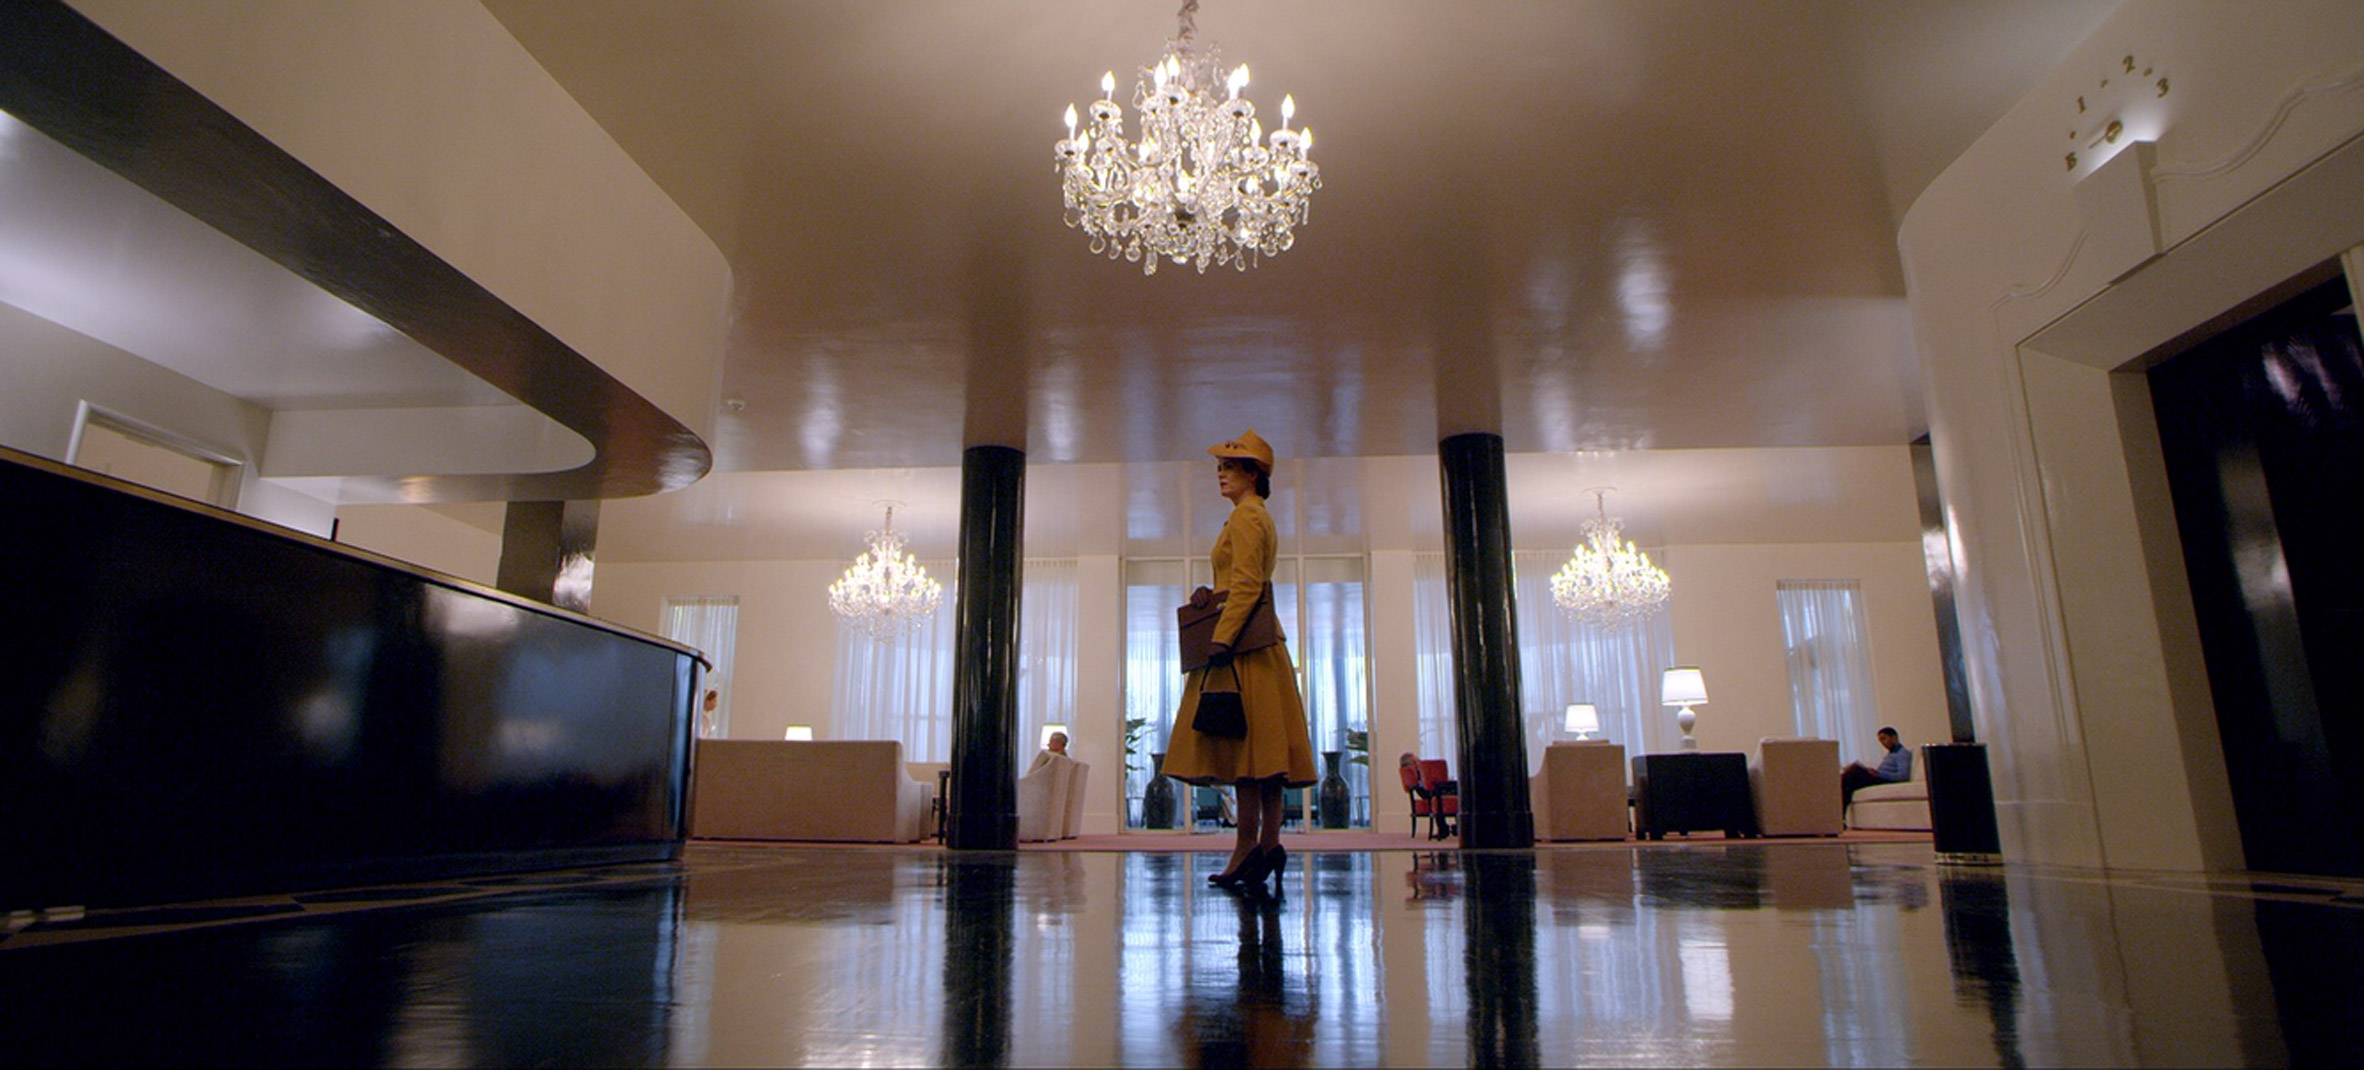 Lucia State Hospital lobby from Netflix's Ratched